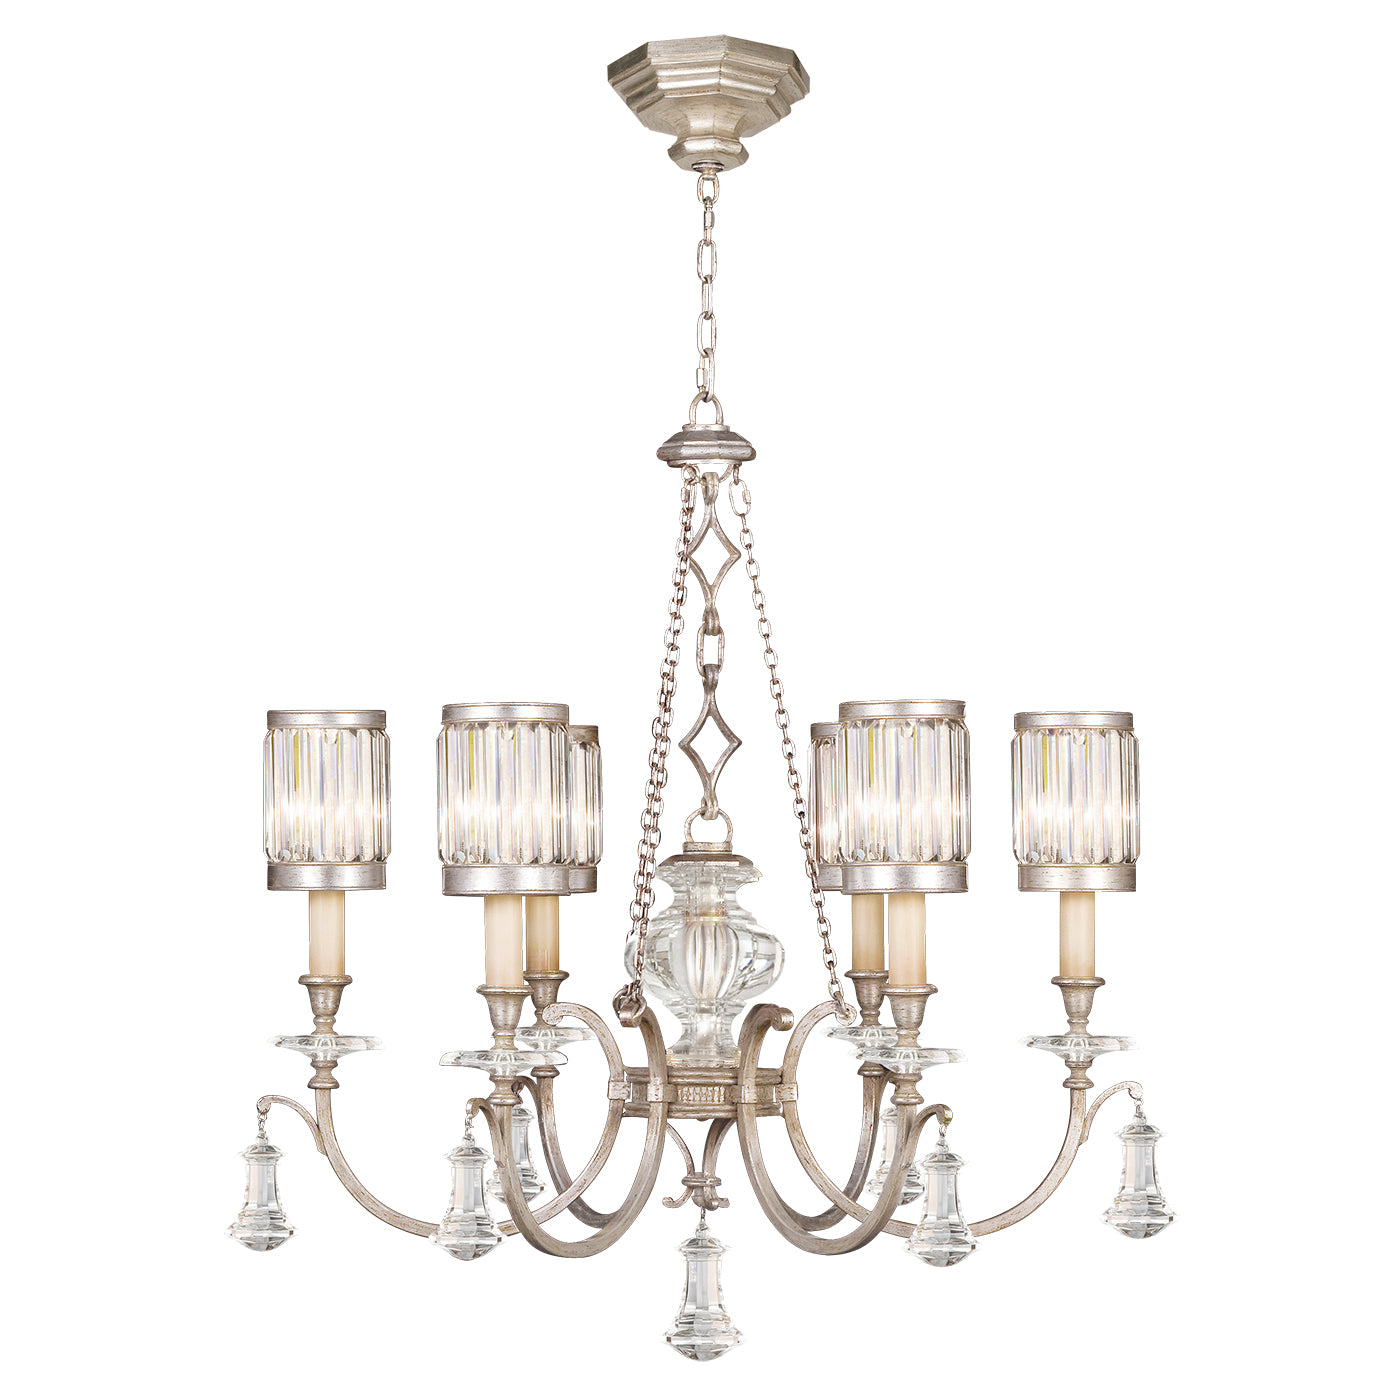 Fine Art Handcrafted Lighting Eaton Place Chandelier Chandeliers Fine Art Handcrafted Lighting Silver 32 x 37 